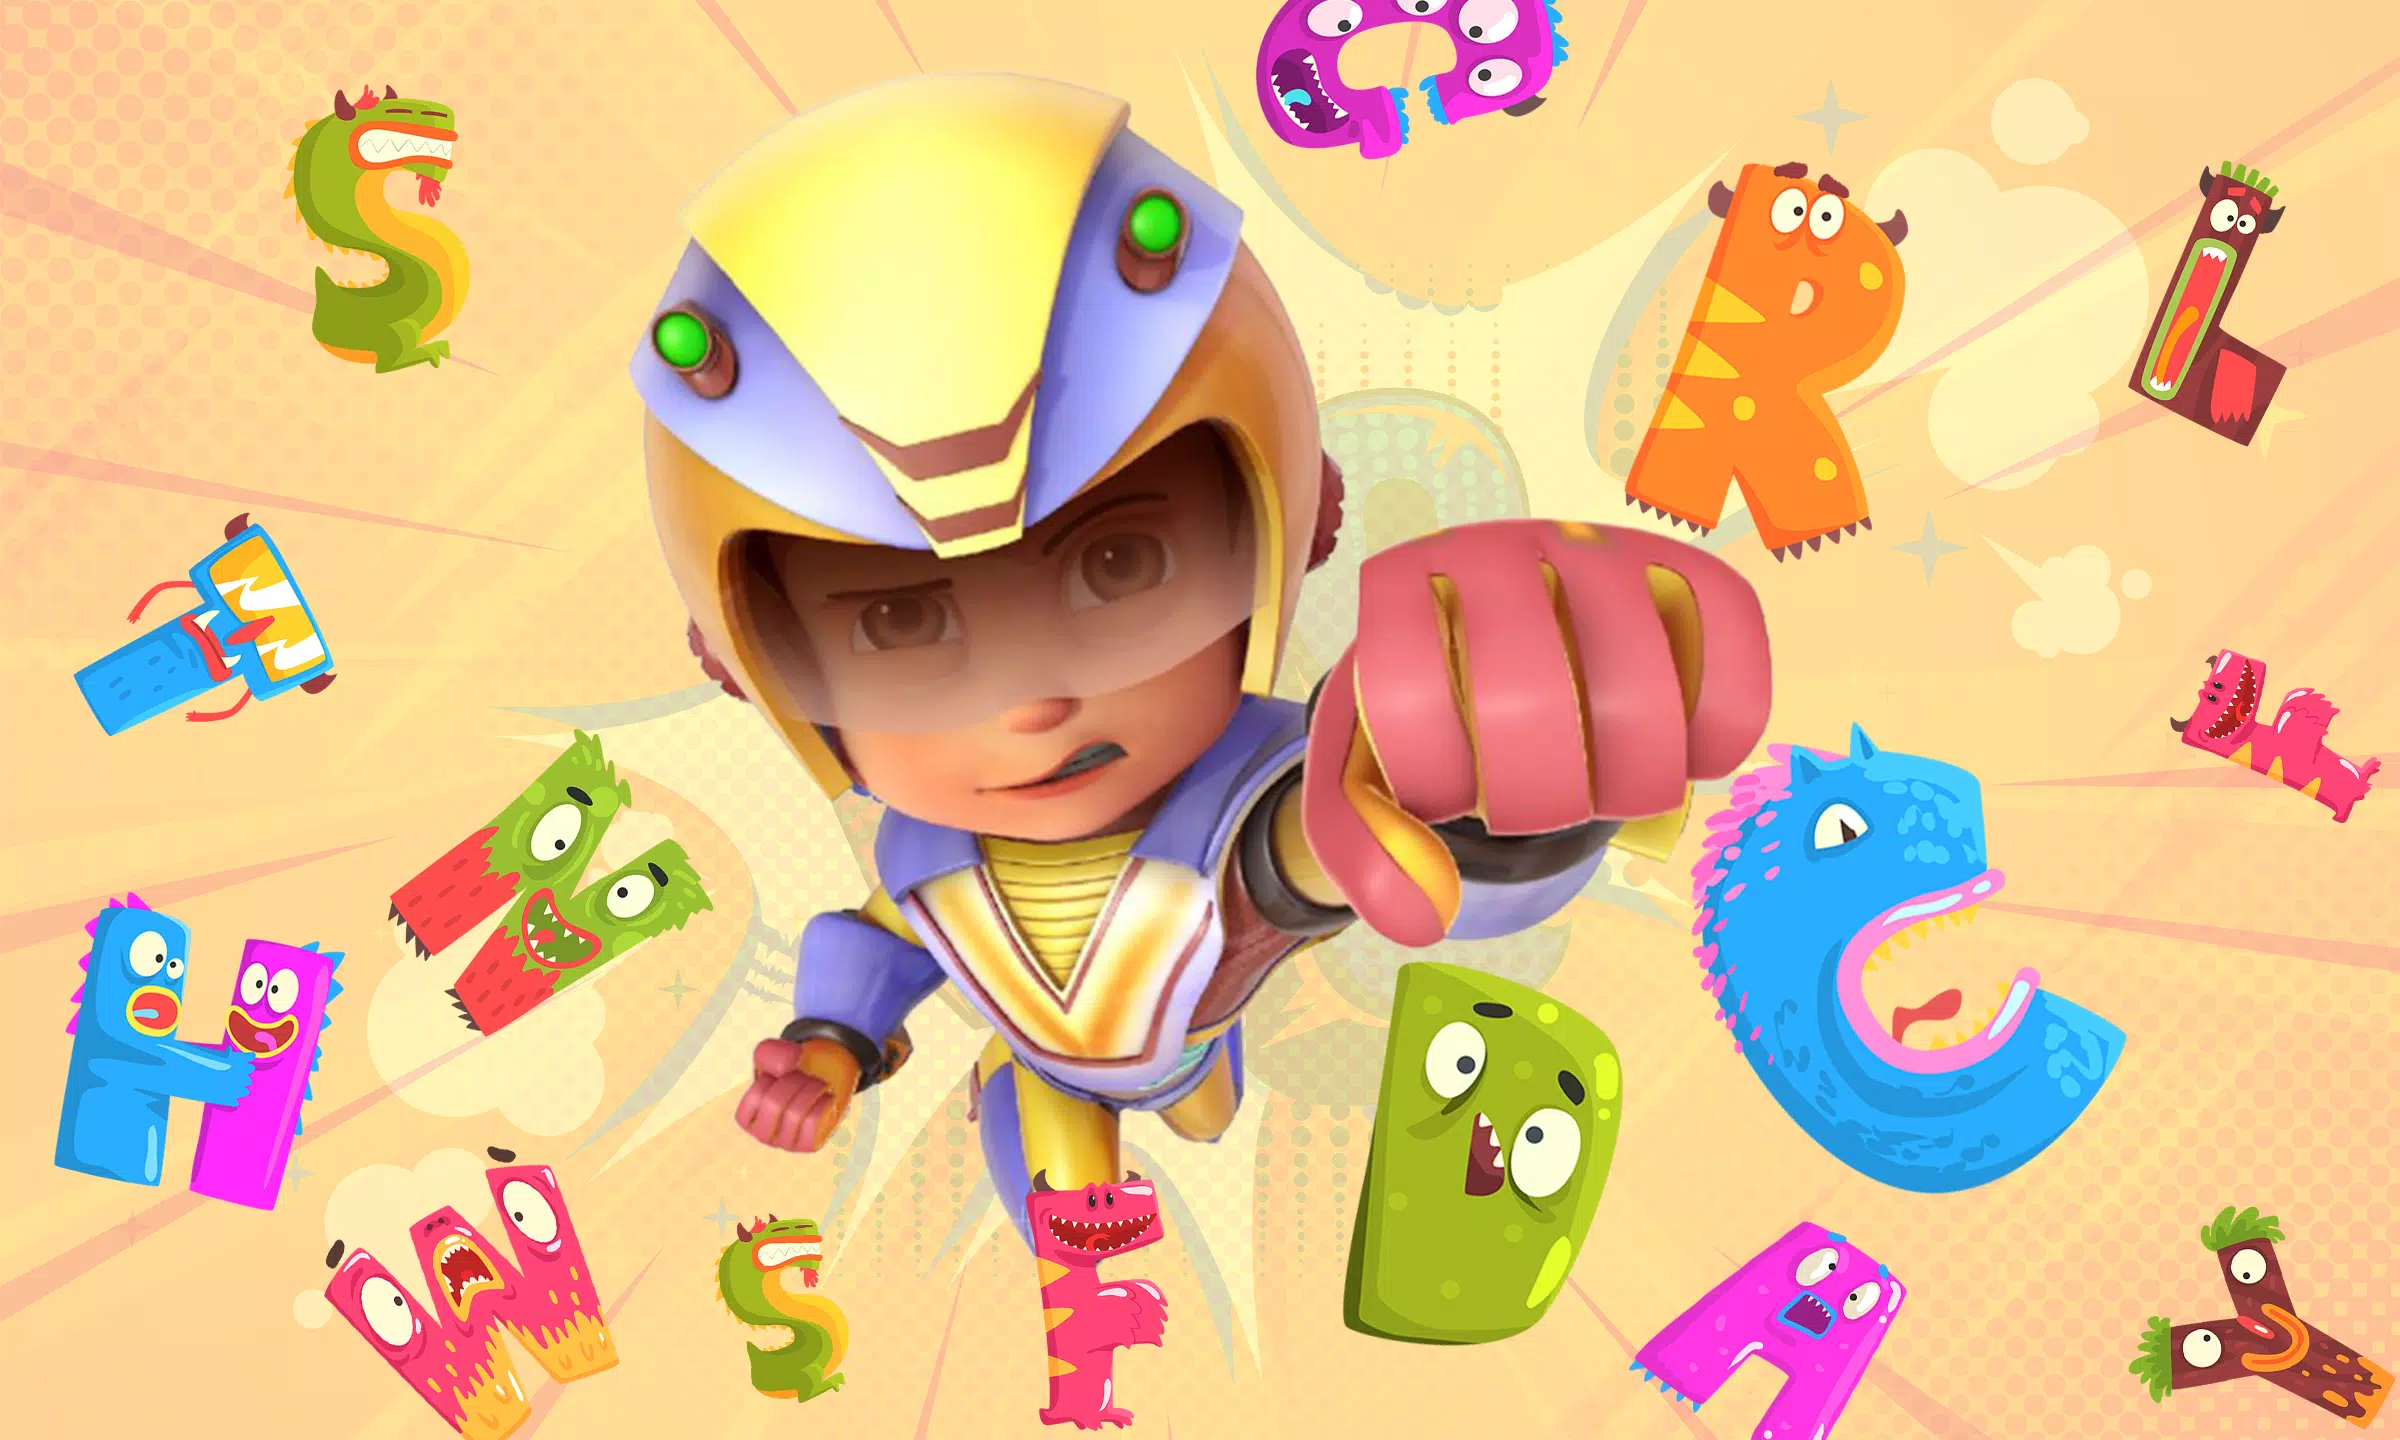 vir the robot boy games fighting vir kids game APK pour Android Télécharger